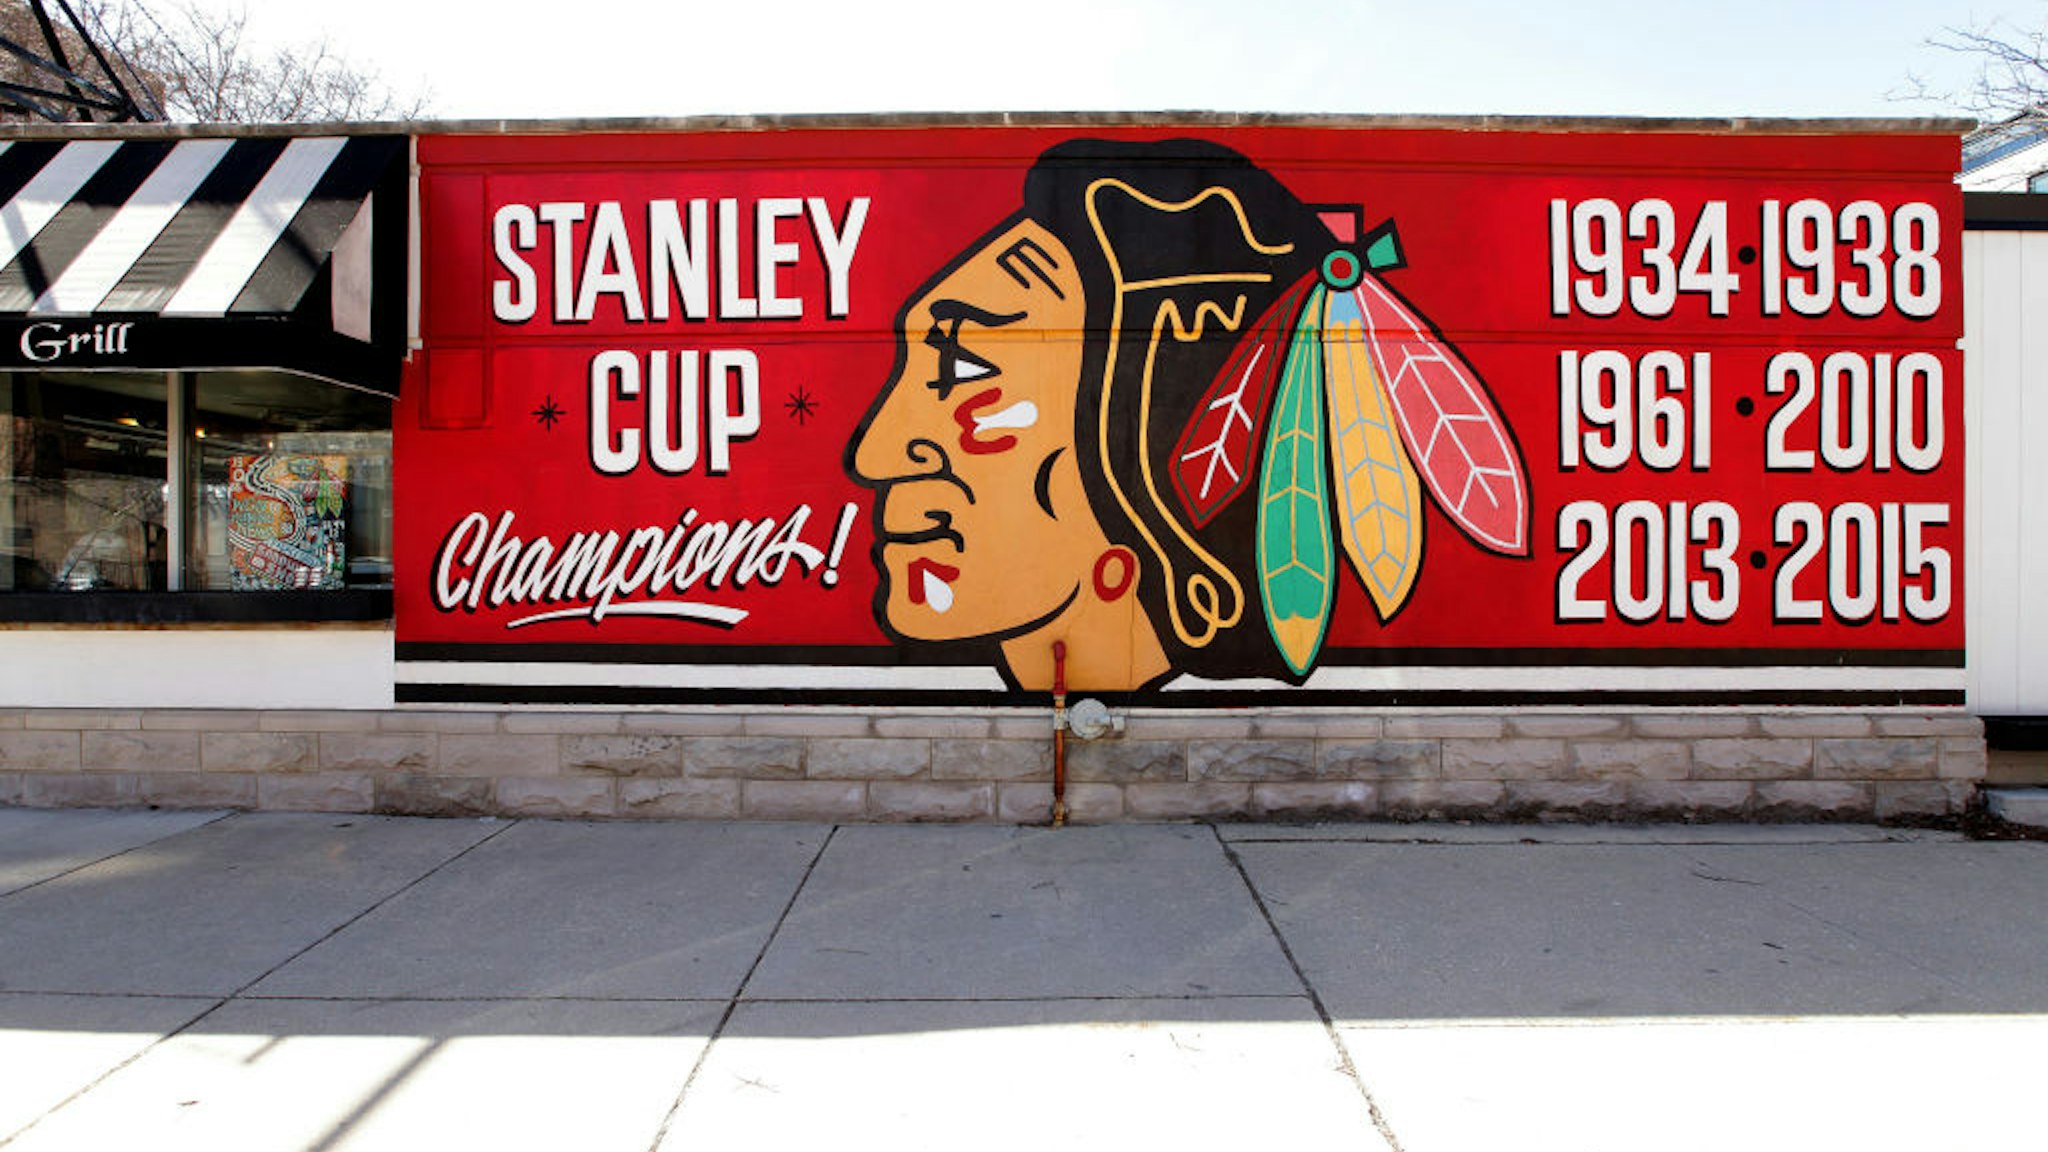 A Chicago Blackhawks 'Stanley Cup Champions' mural is displayed on the side of the Palace Grill Restaurant in Chicago, Illinois on March 7, 2020.